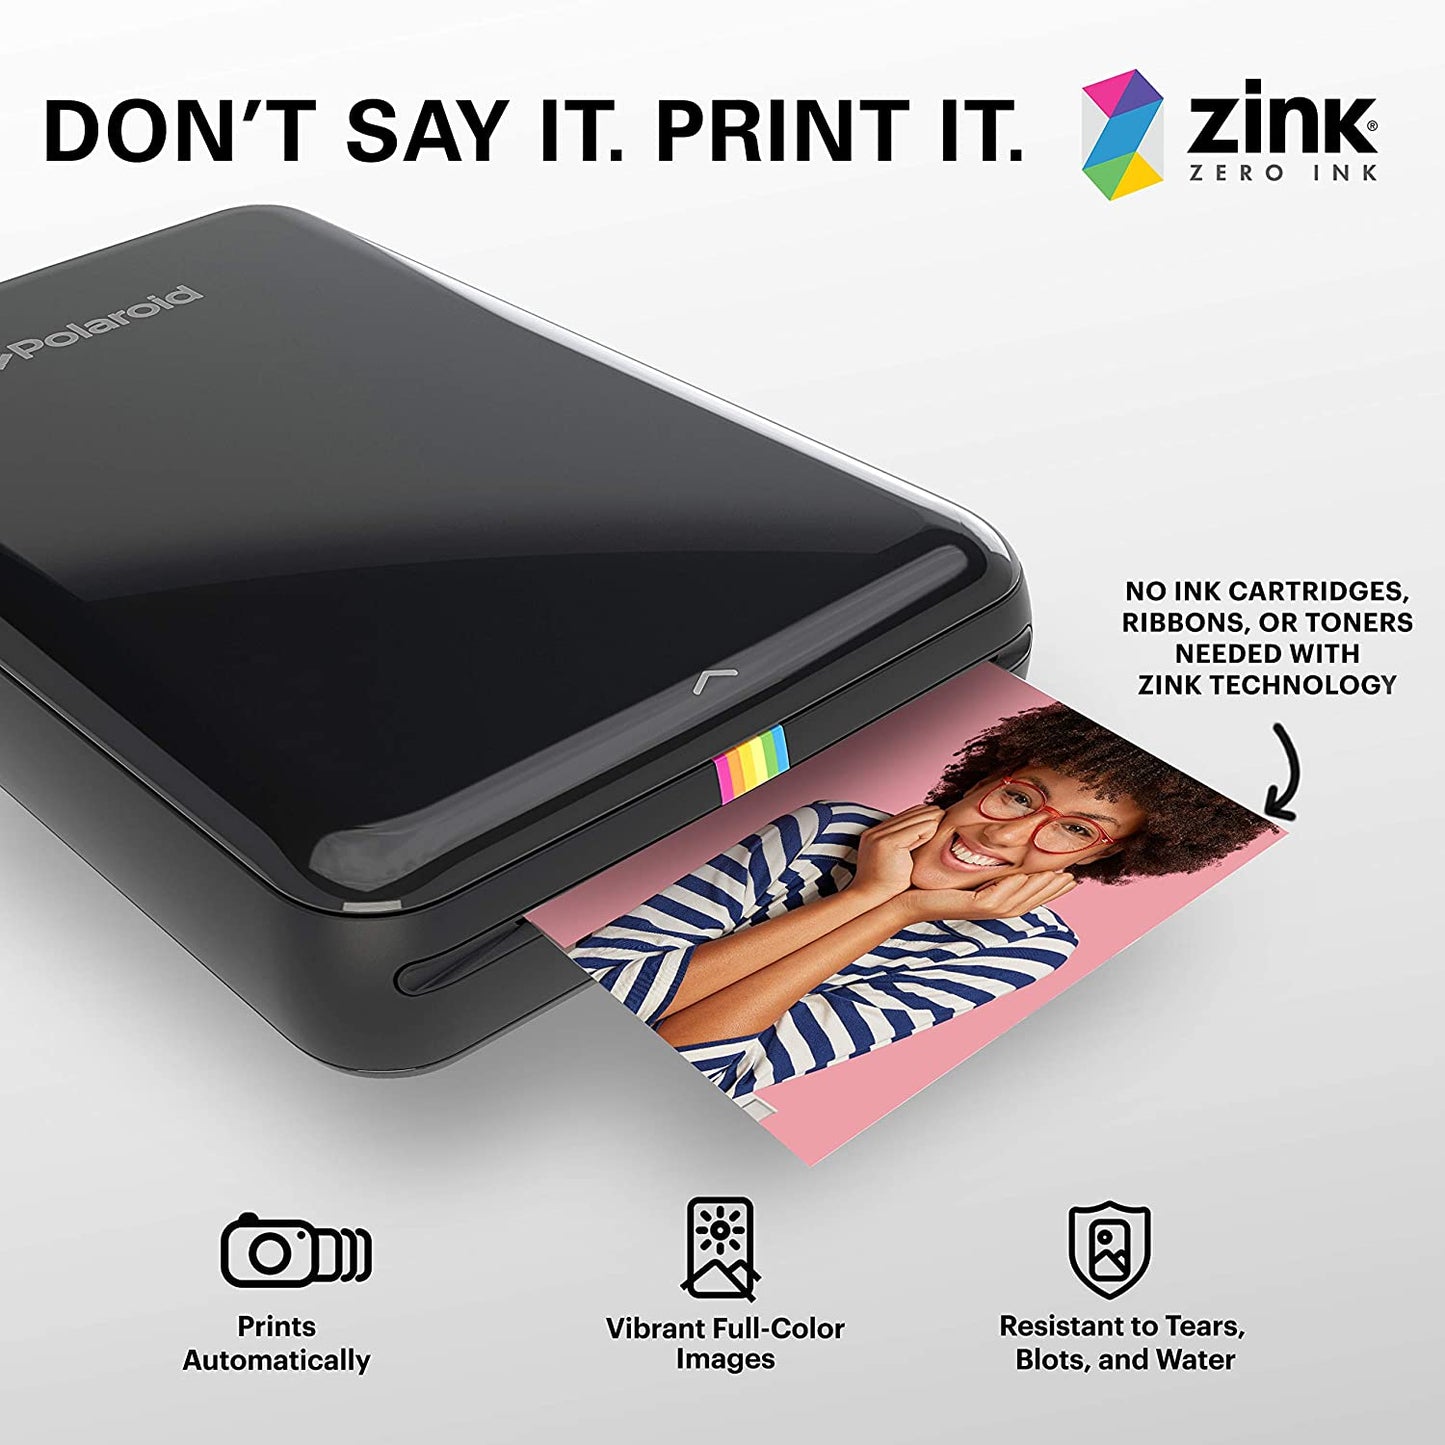 Zink 2"X3" Premium Instant Photo Paper (50 Pack) Compatible with Polaroid Snap, Snap Touch, Zip and Mint Cameras and Printers, 50 Count (Pack of 1)